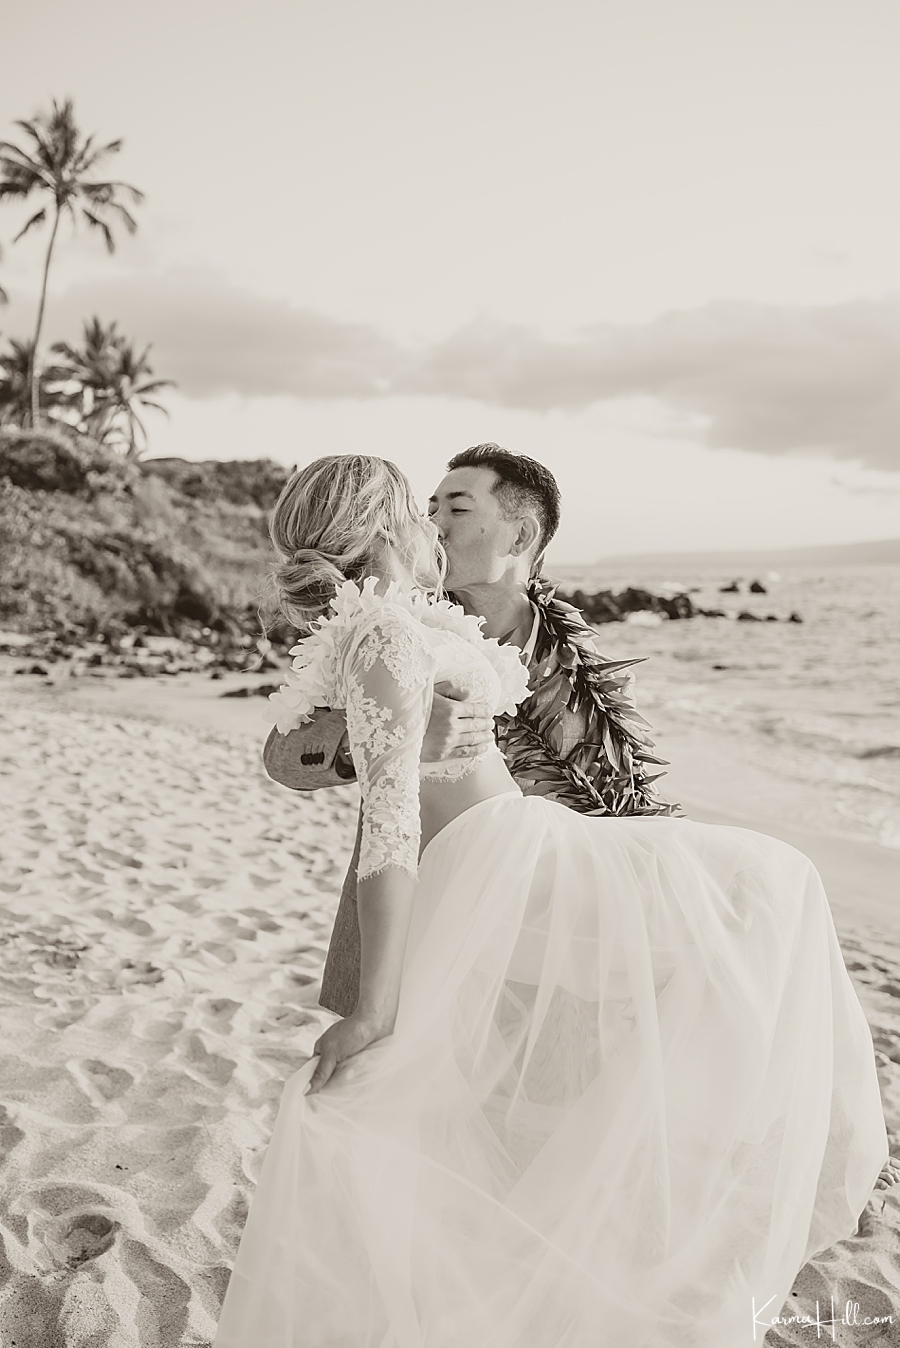 black and white image of a groom and bride with groom carrying the bride over the beach in hawaii 